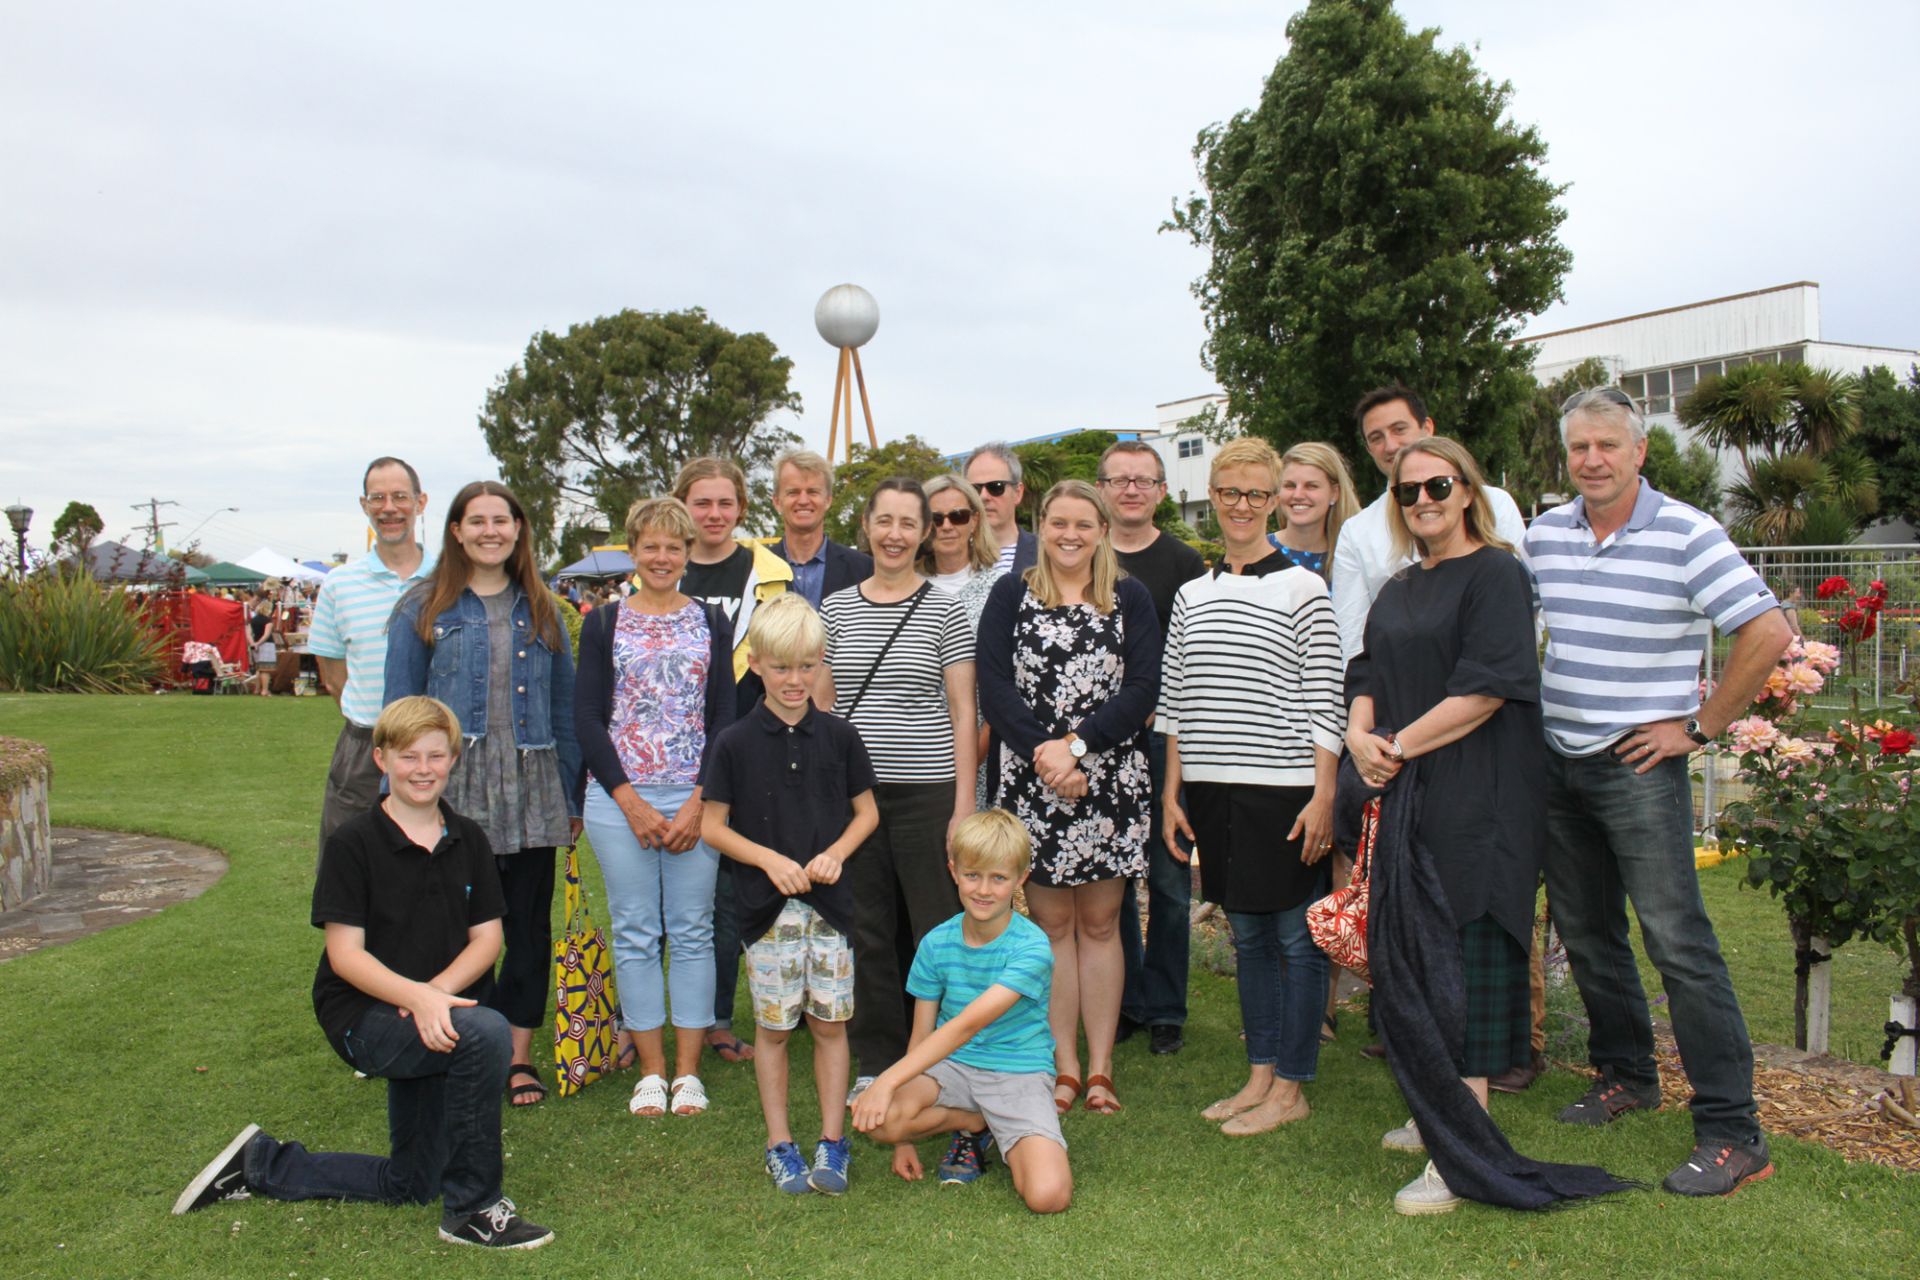 Eighteen members of the Jones family travelled to attend the 2015 community Christmas picnic in the Fletcher Jones gardens.  Photo: Colleen Hughson